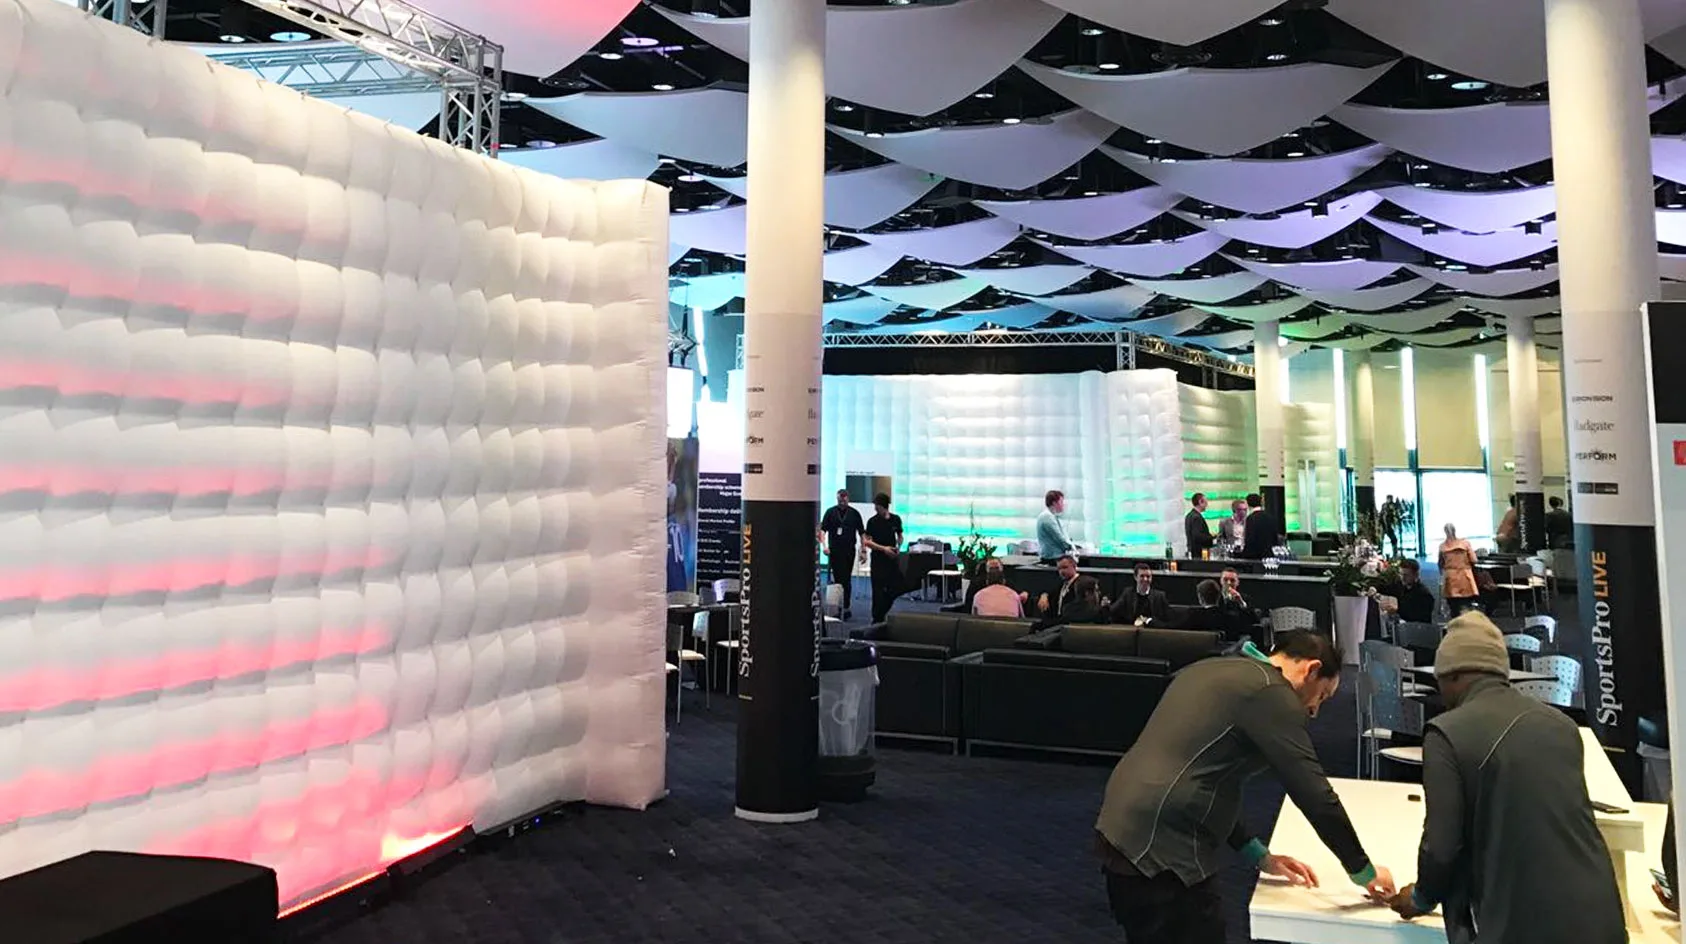 Pic showing a Created By Air Airwall structure used as an inflatable divider at an indoor event